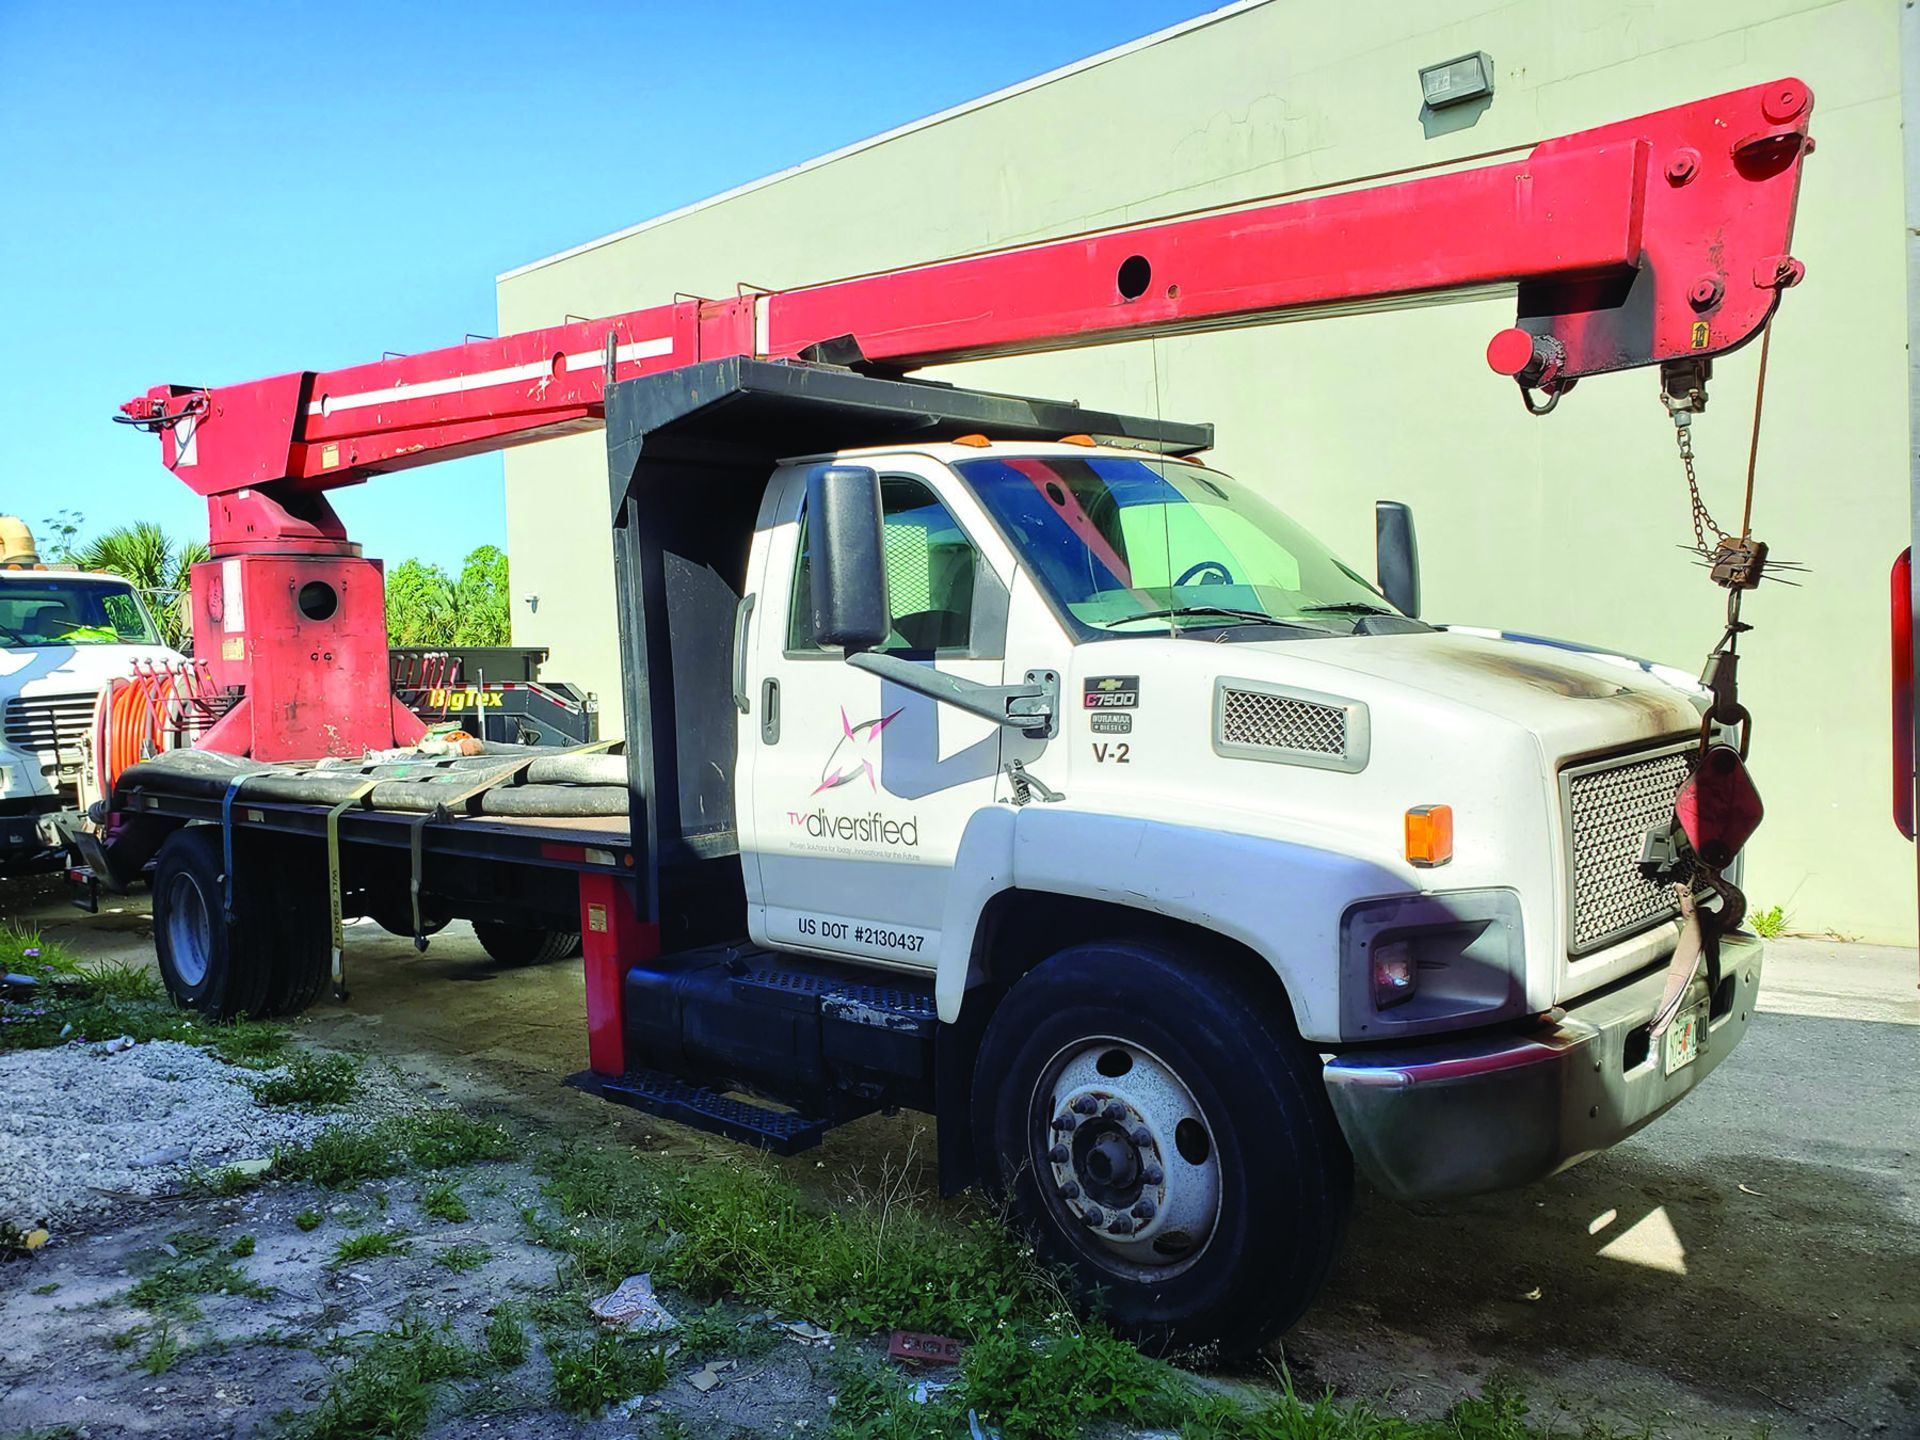 CHEVROLET C7500 S/A FLAT BED WITH 36' TELESCOPING BOOM CRANE, MODEL RO STNGERTC120, 3-STAGE BOOM, - Image 13 of 13